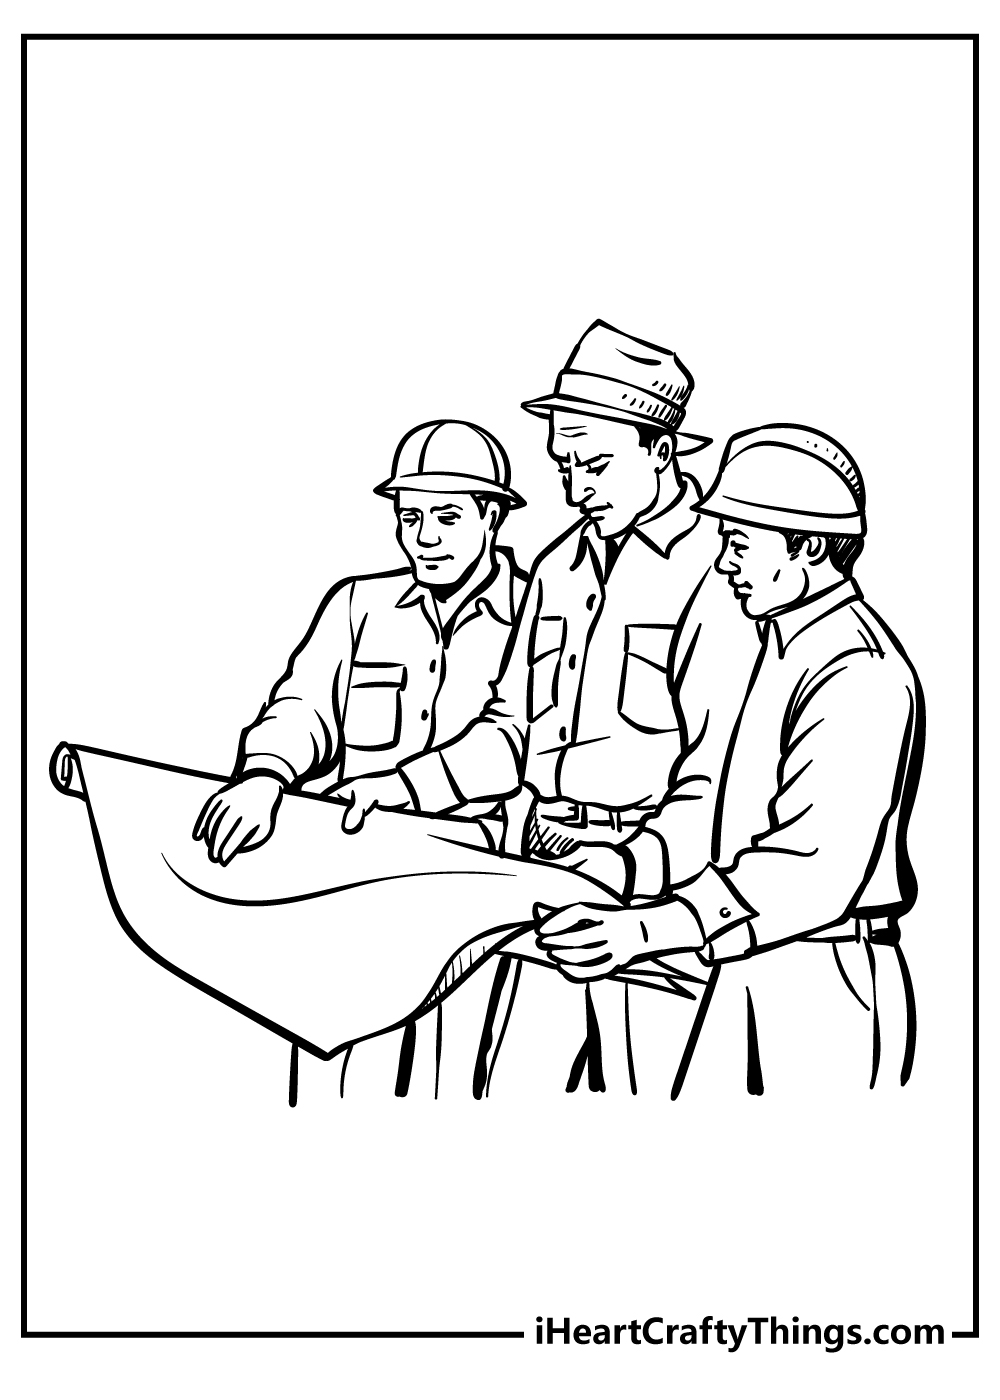 Construction Coloring Sheet for children free download